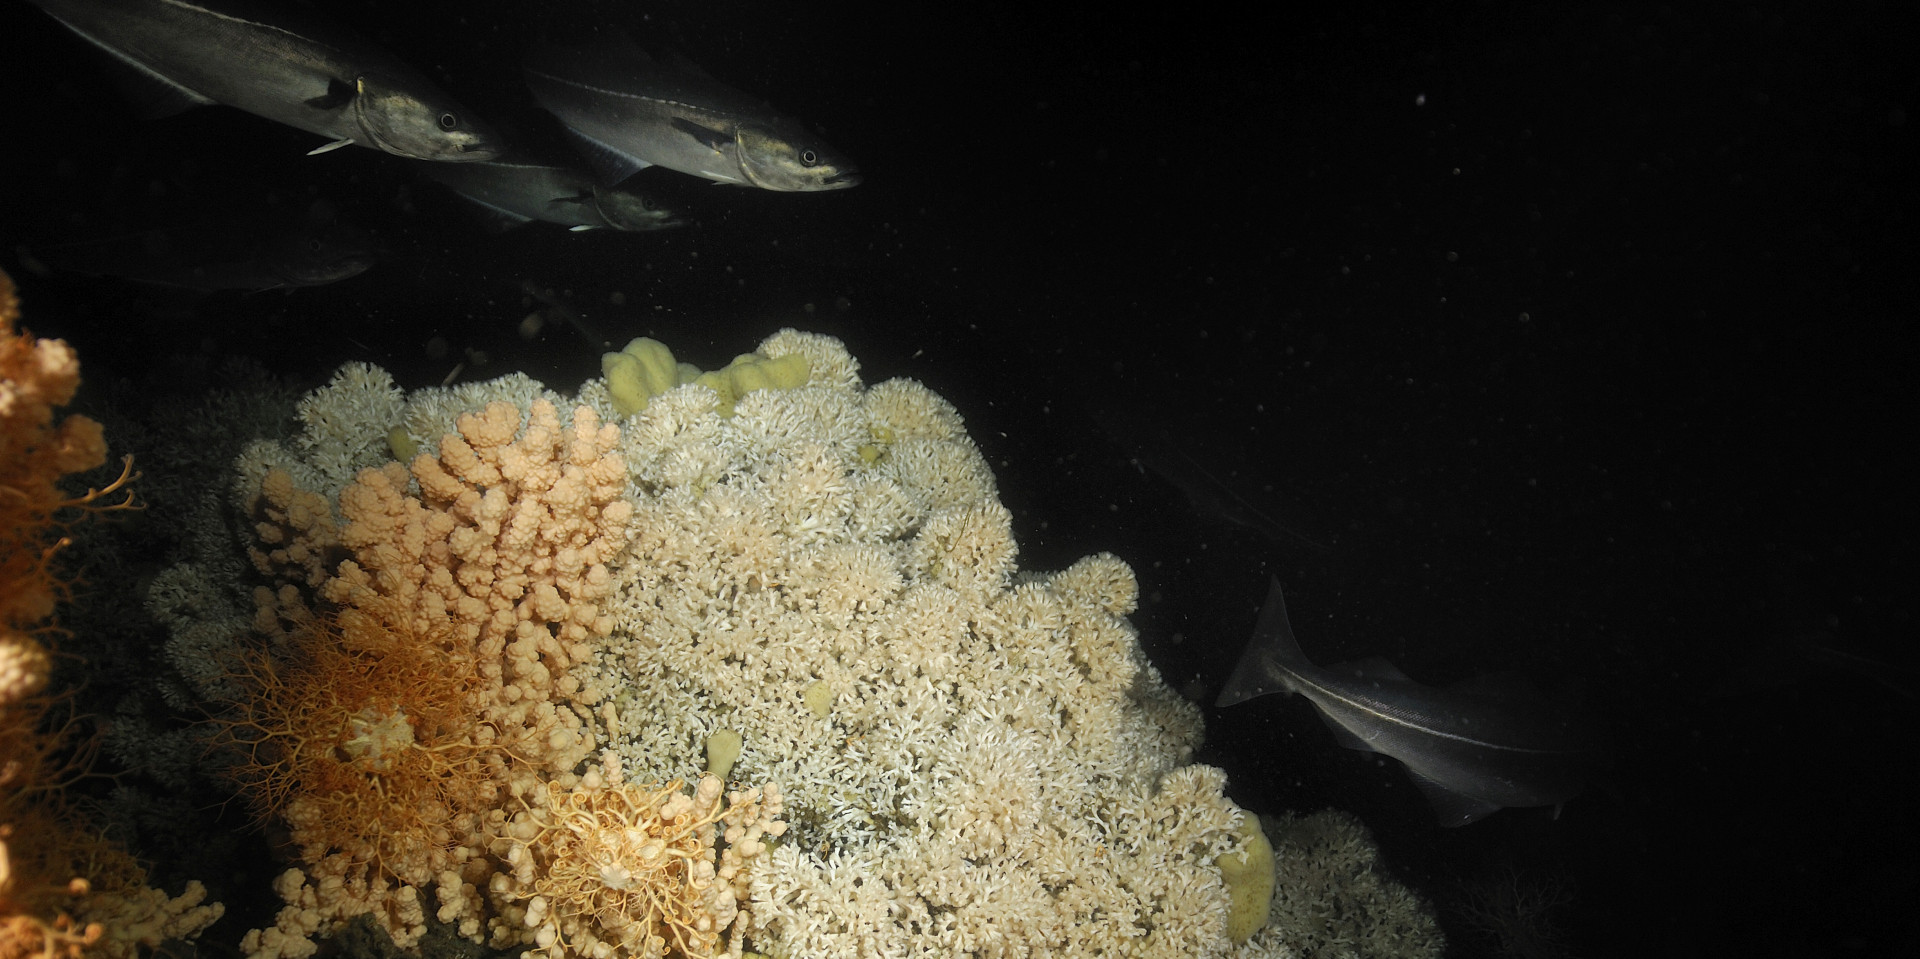 Cold Water Corals reefs are high biodiversity oases in the deep ocean. Photo Solvin Zankl